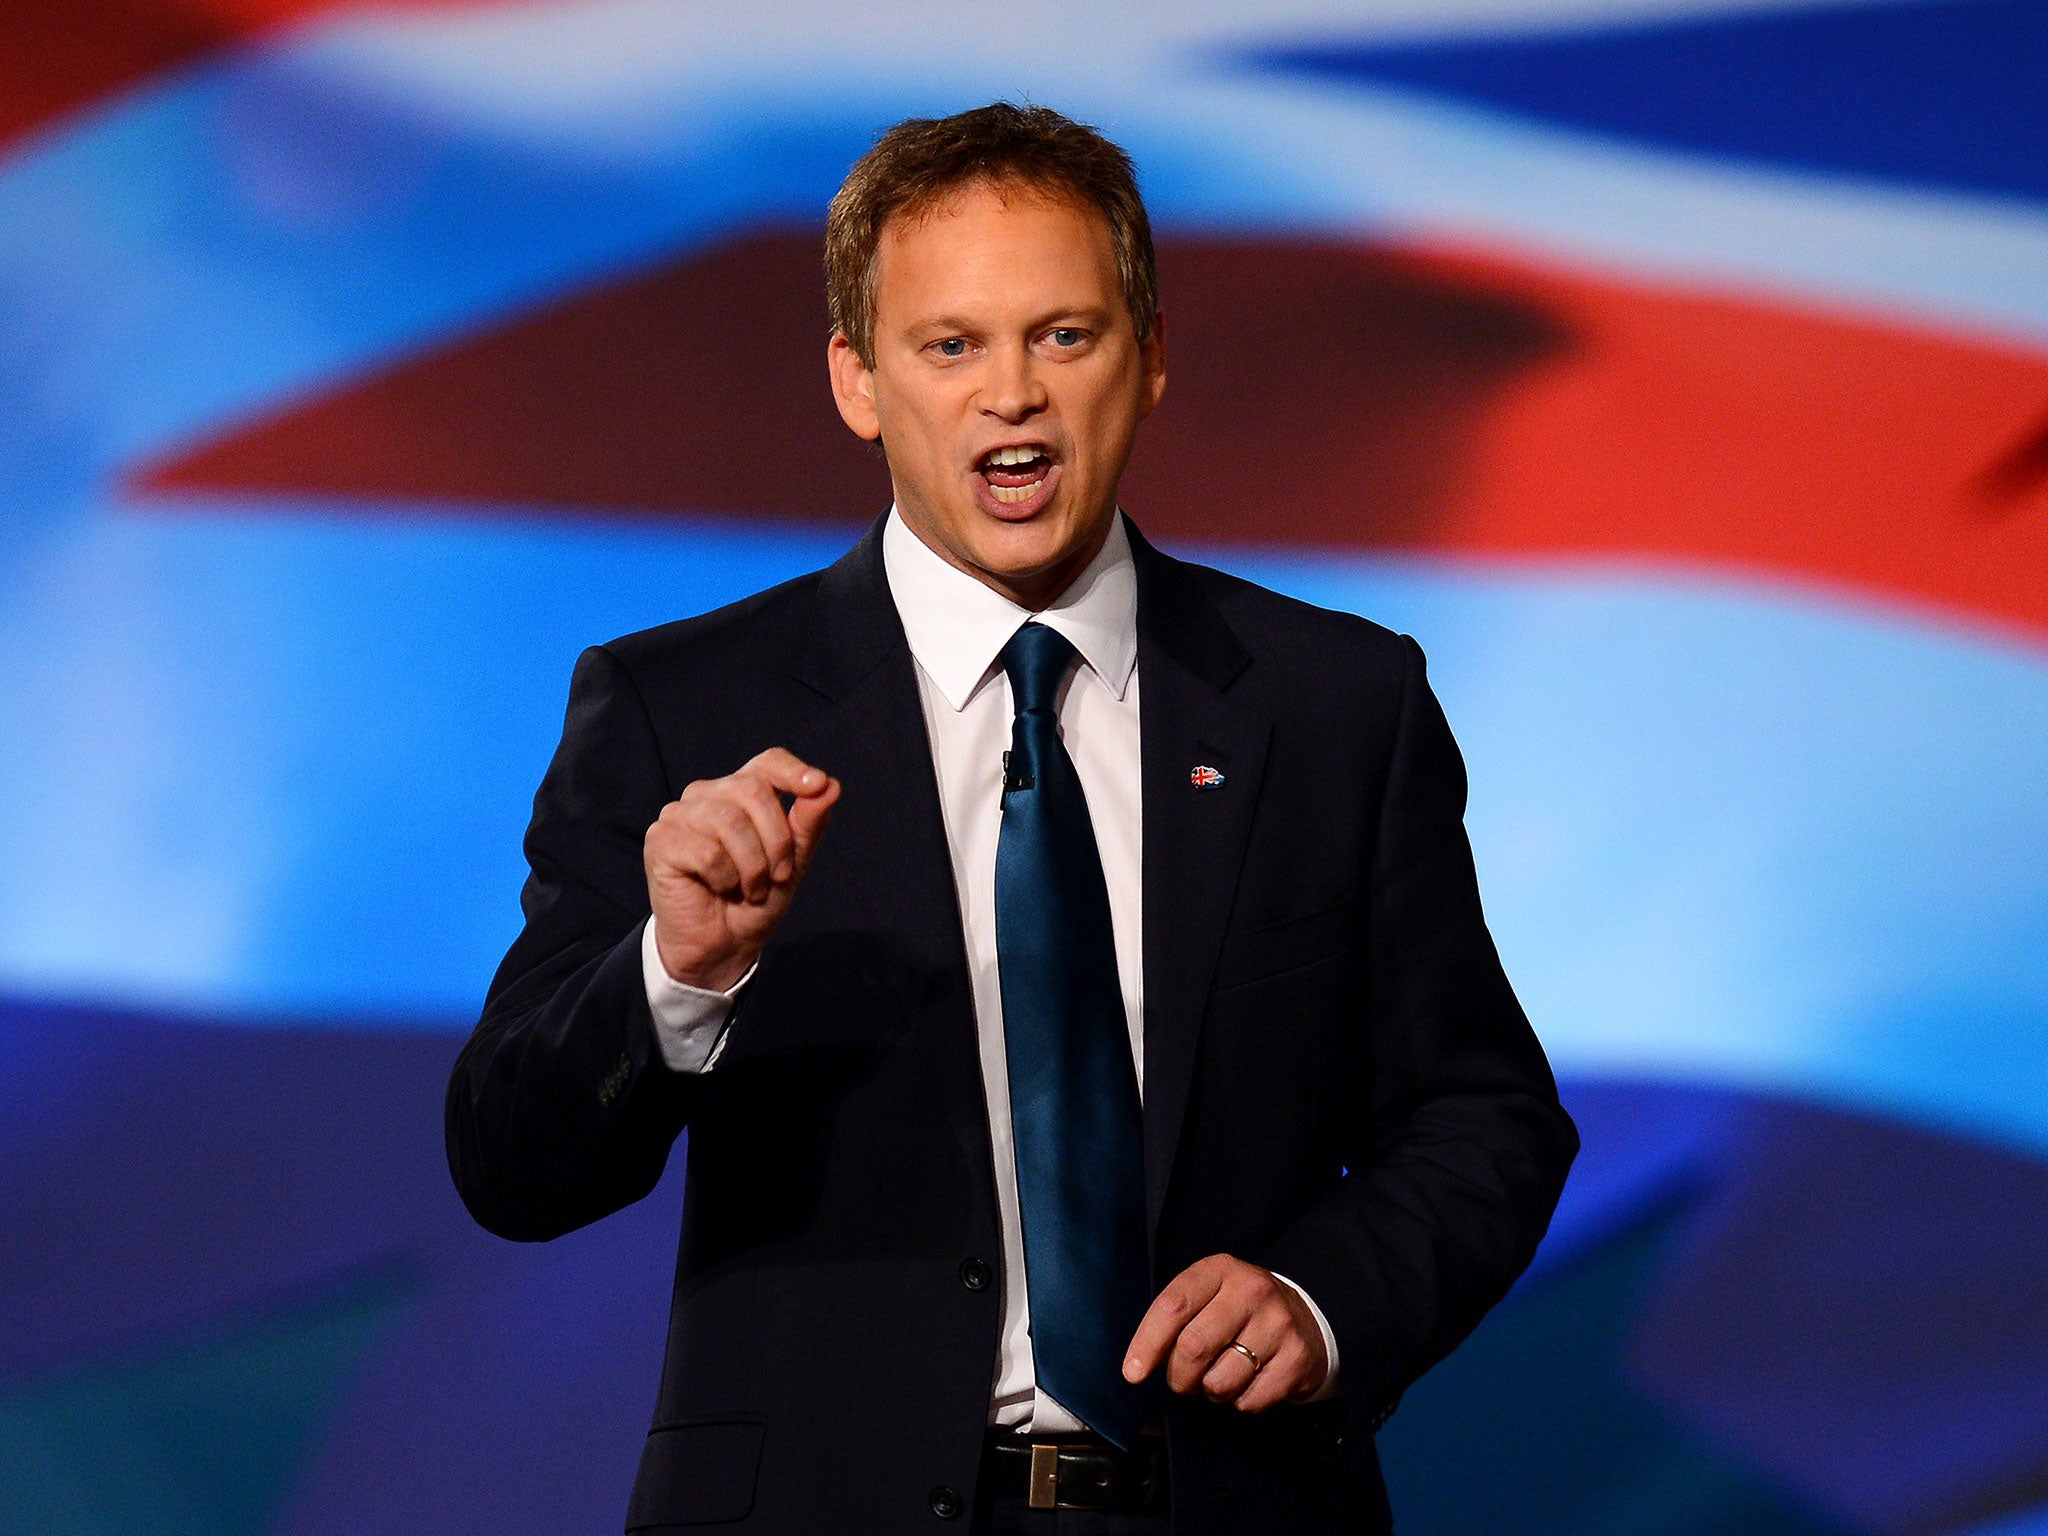 Grant Shapps has parroted the same plan that Boris Johnson